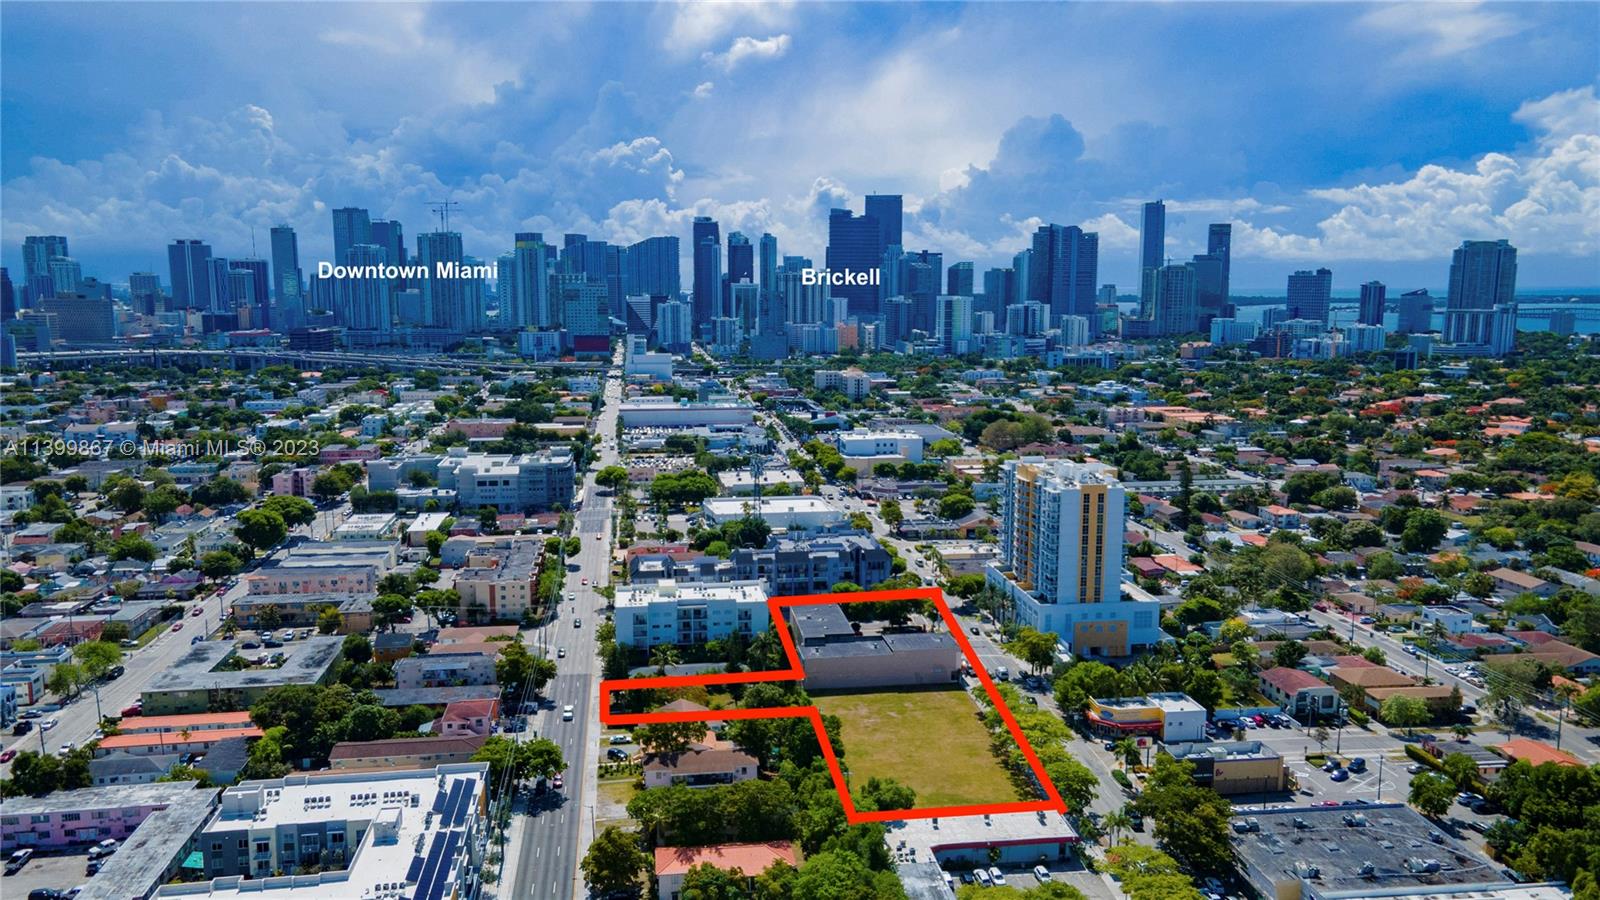 901/922/939/955/965 & 922 SW 8th St, Miami, Florida 33130, ,Land,For Sale,901/922/939/955/965 & 922 SW 8th St,A11399867